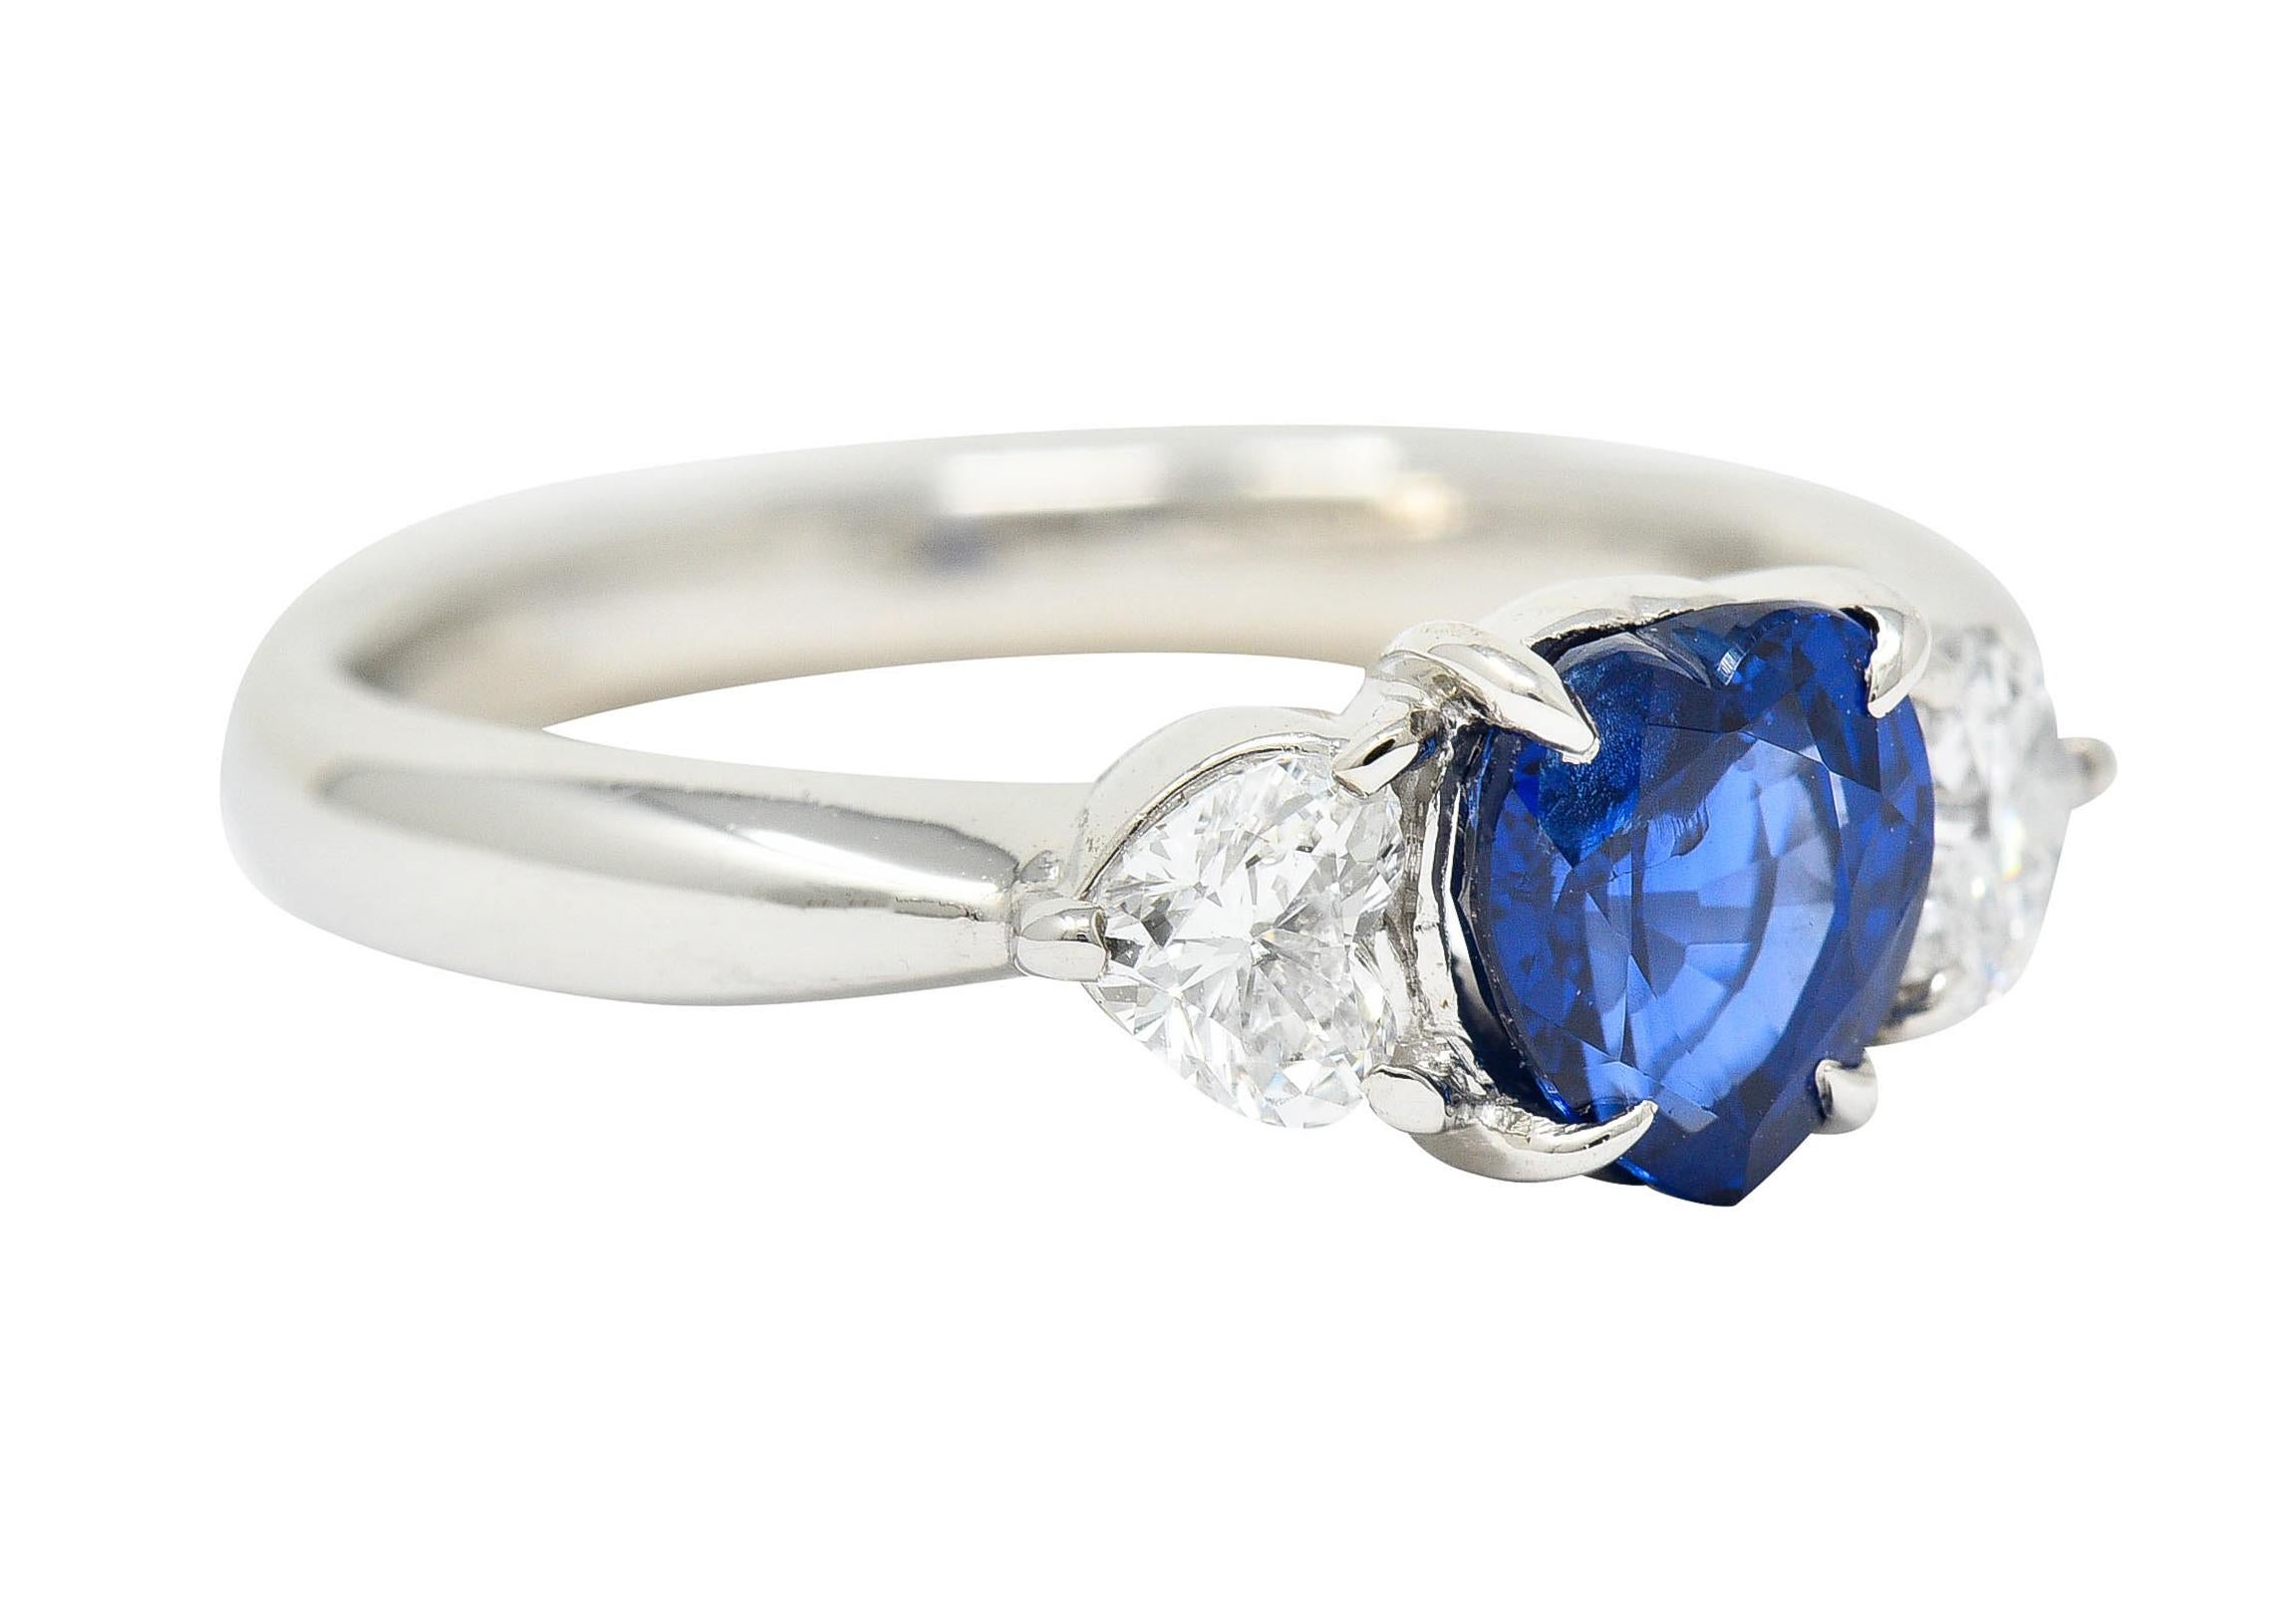 Three stone ring centers a heart cut sapphire weighing approximately 1.14 carats

Transparent with vibrant medium dark royal blue color

Flanked by two heart cut diamond weighing in total approximately 0.34 carat - H/I color with SI clarity

Stamped